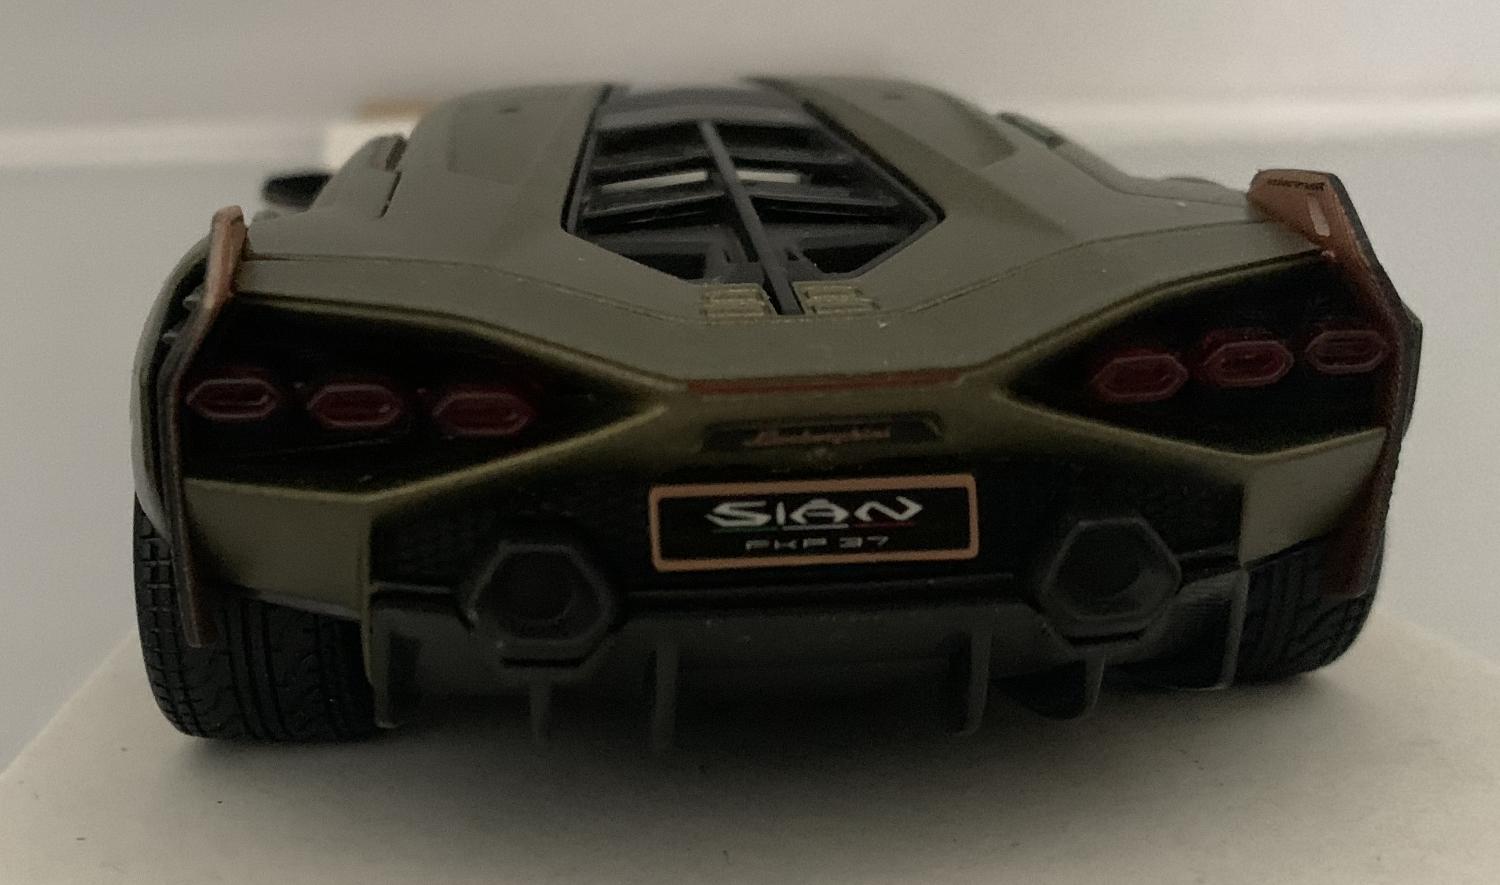 An excellent reproduction of the Lamborghini Sian FKP 37 with high level of detail throughout, all authentically recreated.  The model is presented in a window display box, the car is approx. 19.5 cm long and the presentation box is 23 cm long